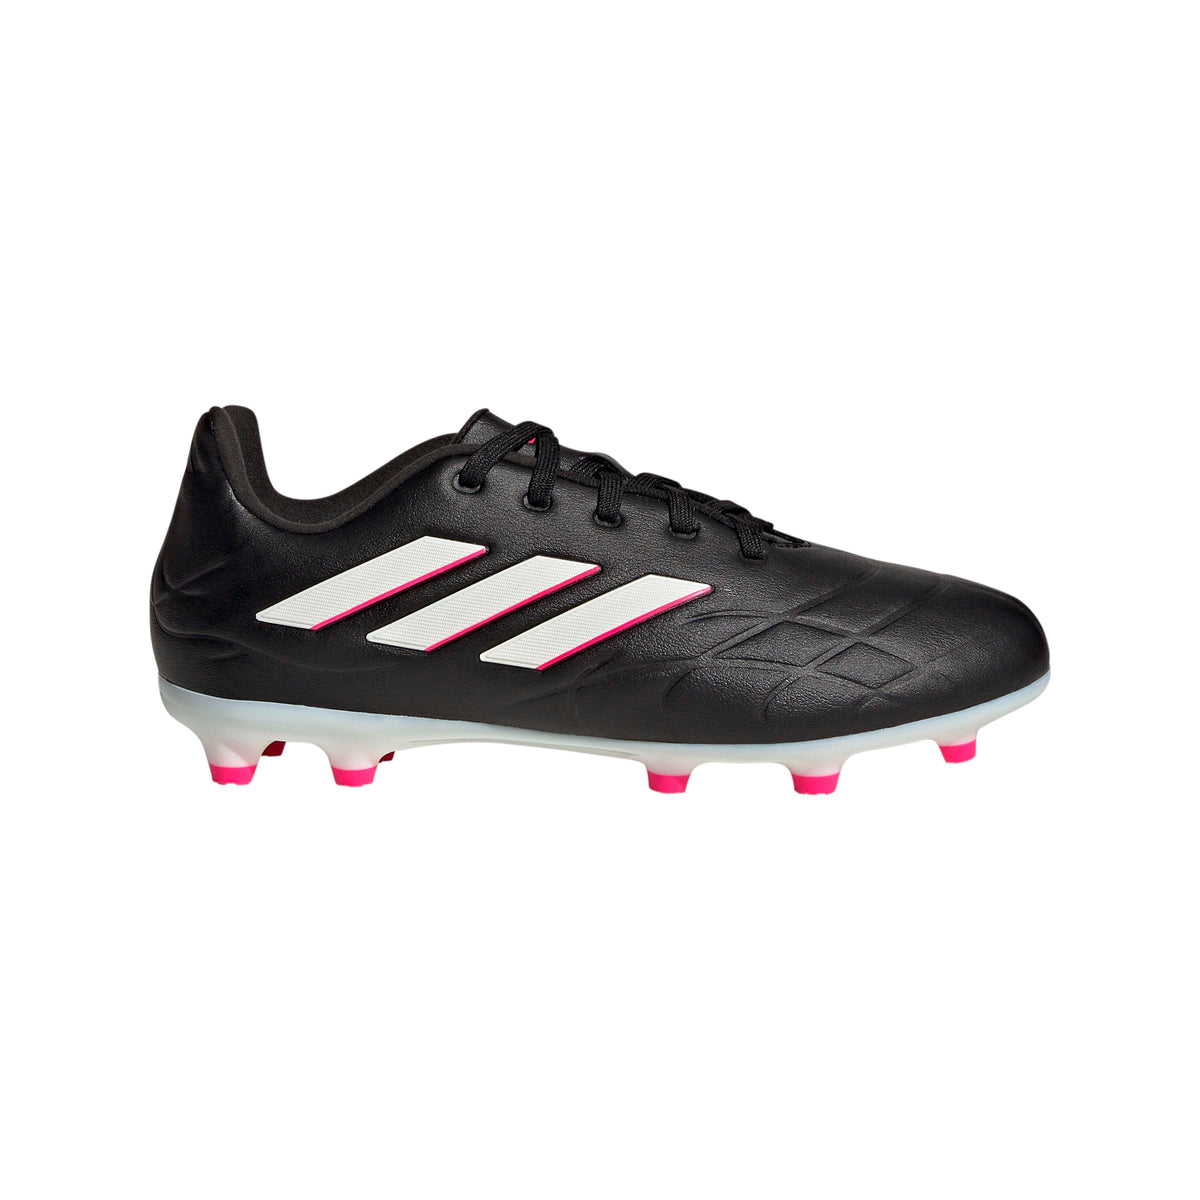 adidas Youth Copa Pure.3 Firm Ground Soccer Cleats | HQ8945 Cleats Adidas 11K Core Black / Zero Met. / Team Shock Pink 2 